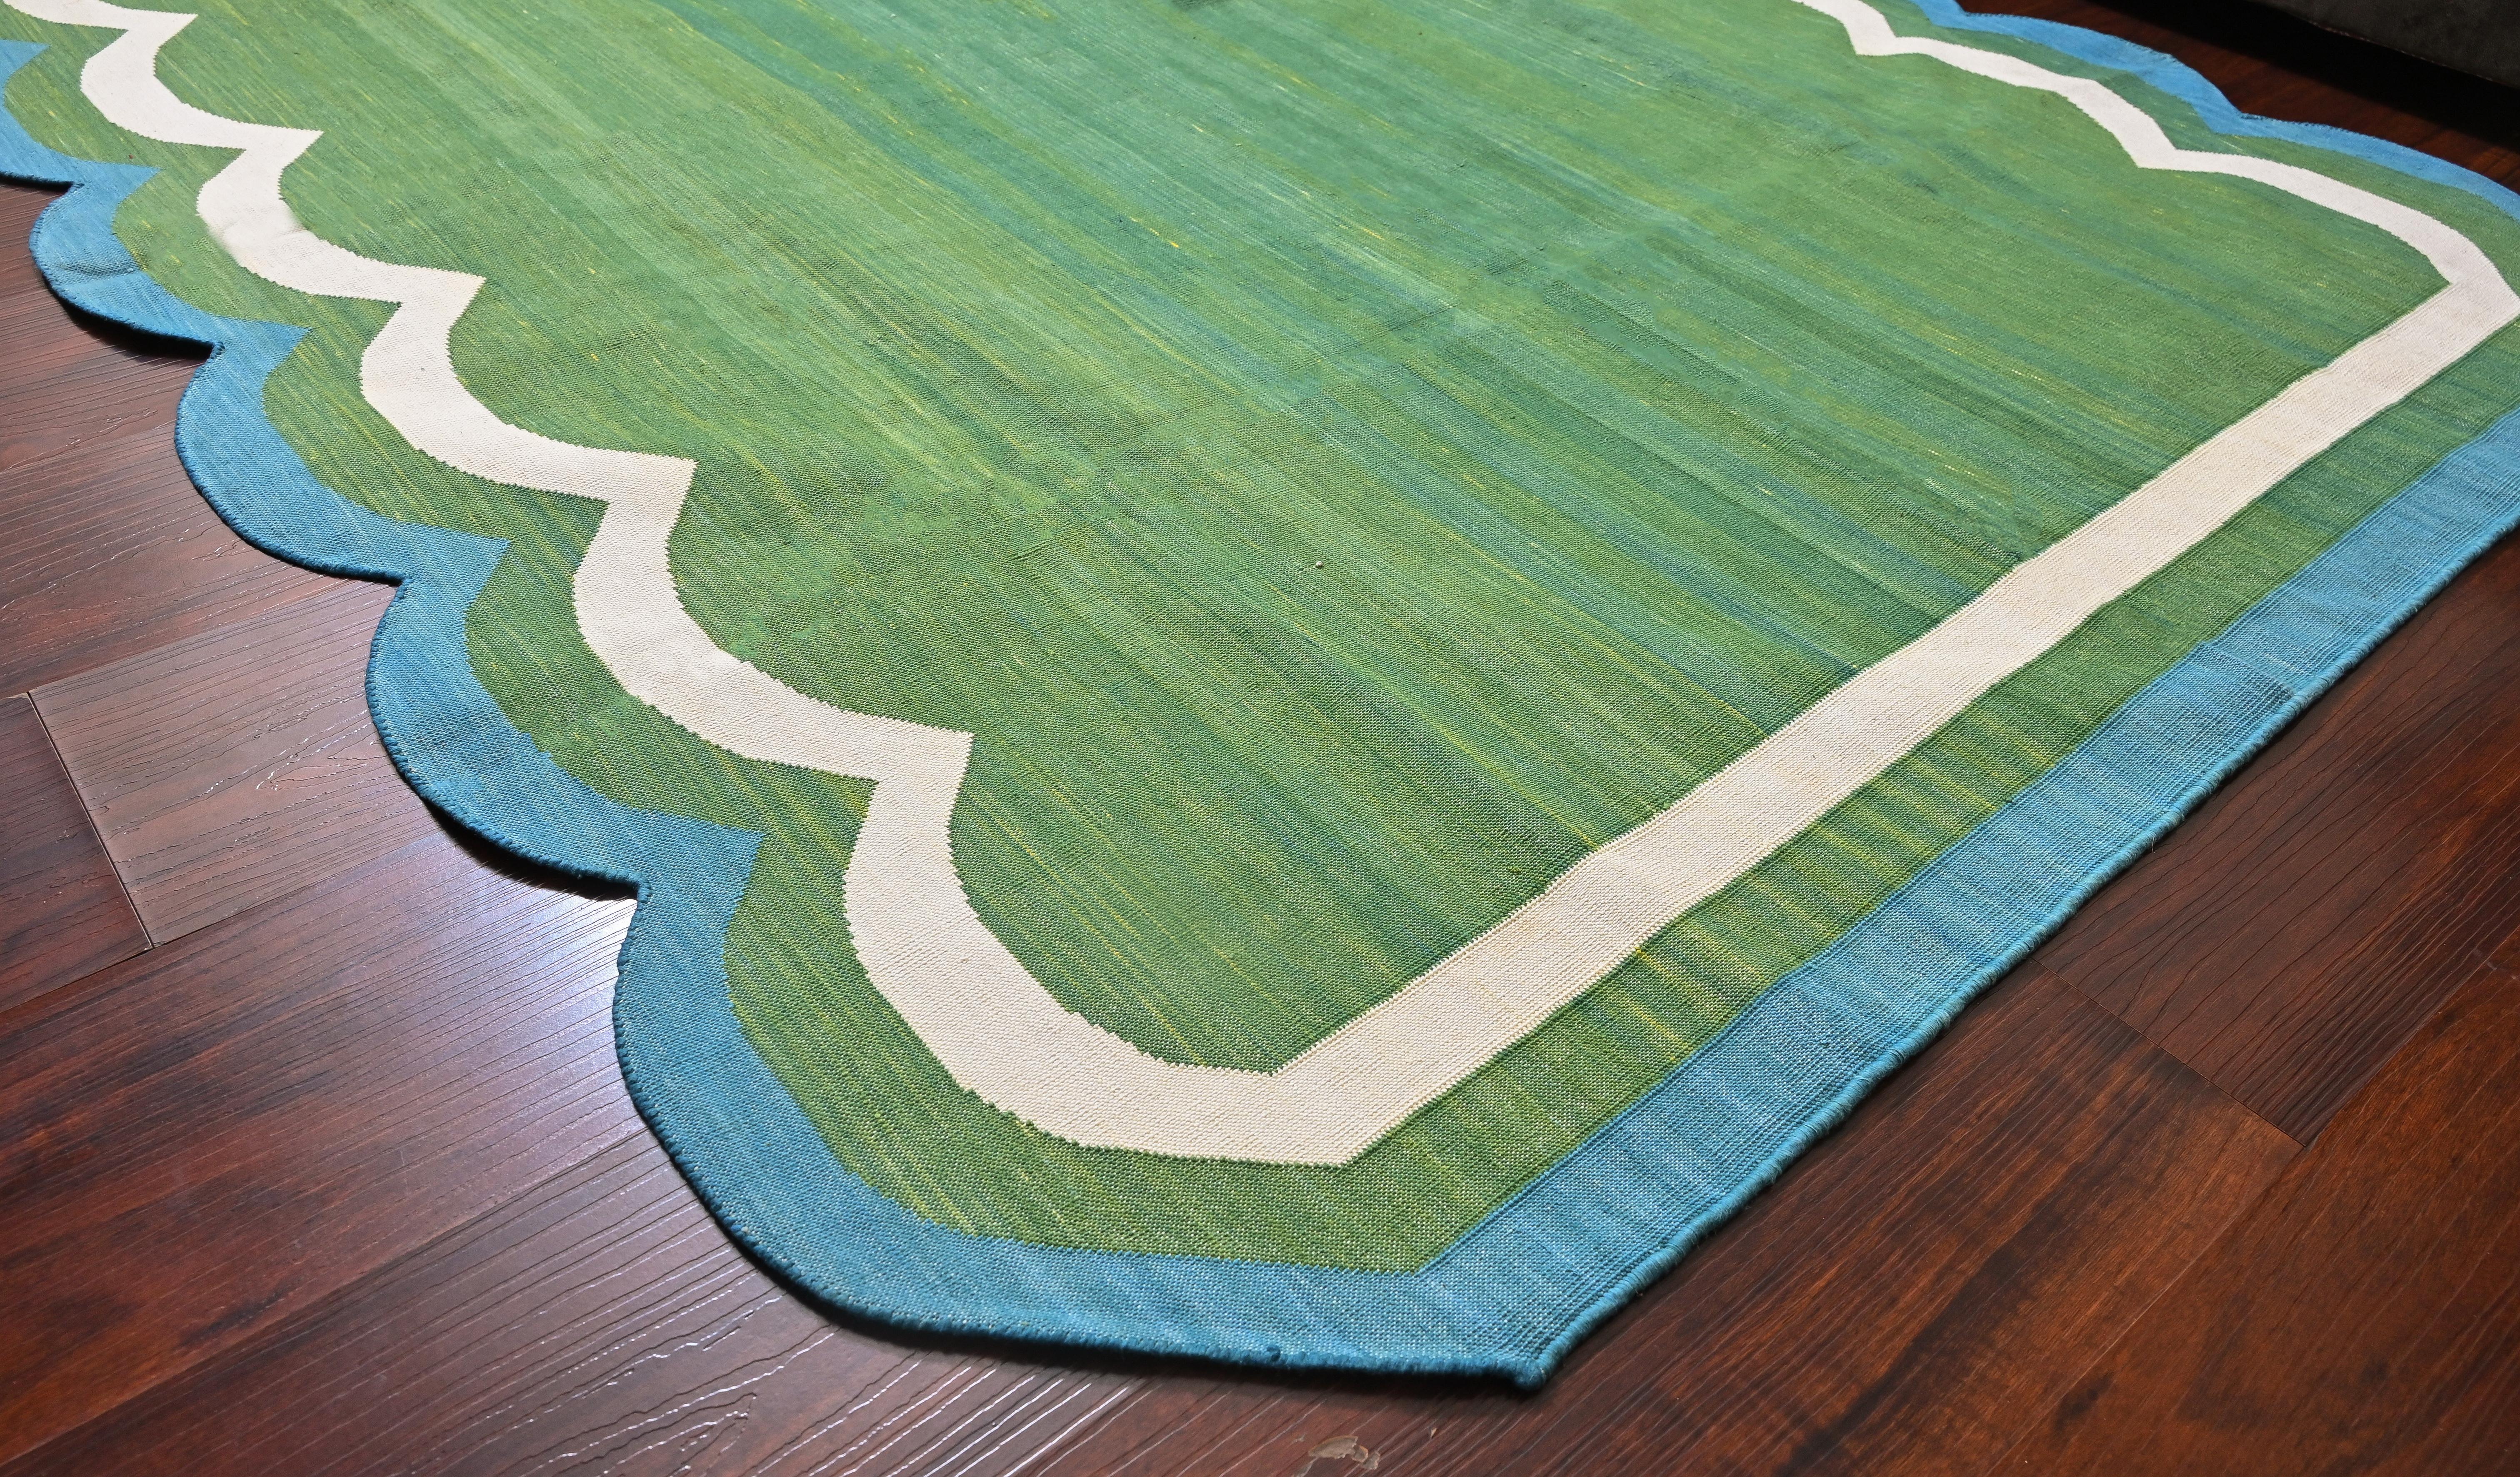 Mid-Century Modern Handmade Cotton Area Flat Weave Rug, 5x8 Green And Blue Scalloped Kilim Dhurrie For Sale